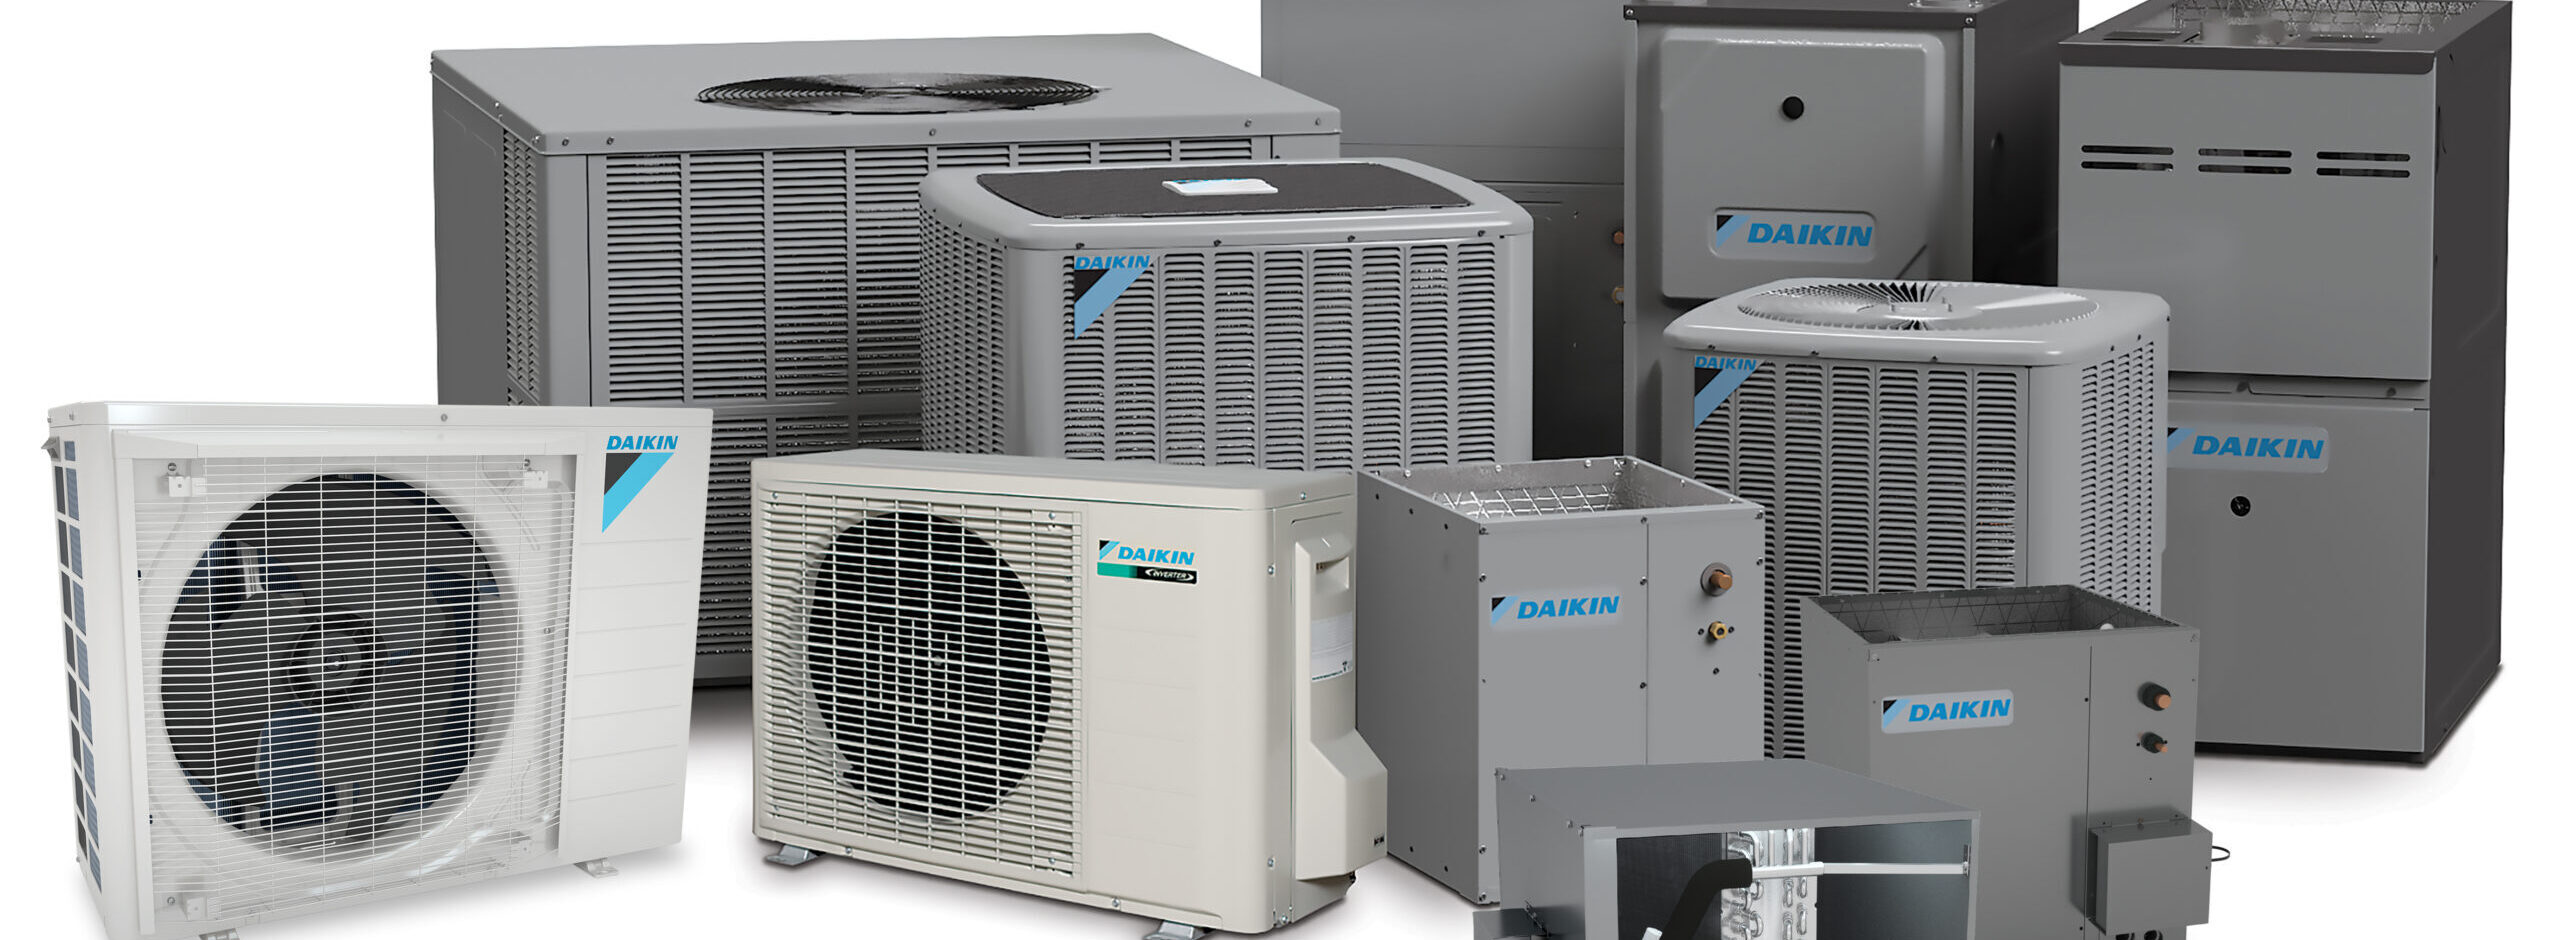 daikin-fit-get-the-next-generation-of-central-ac-today